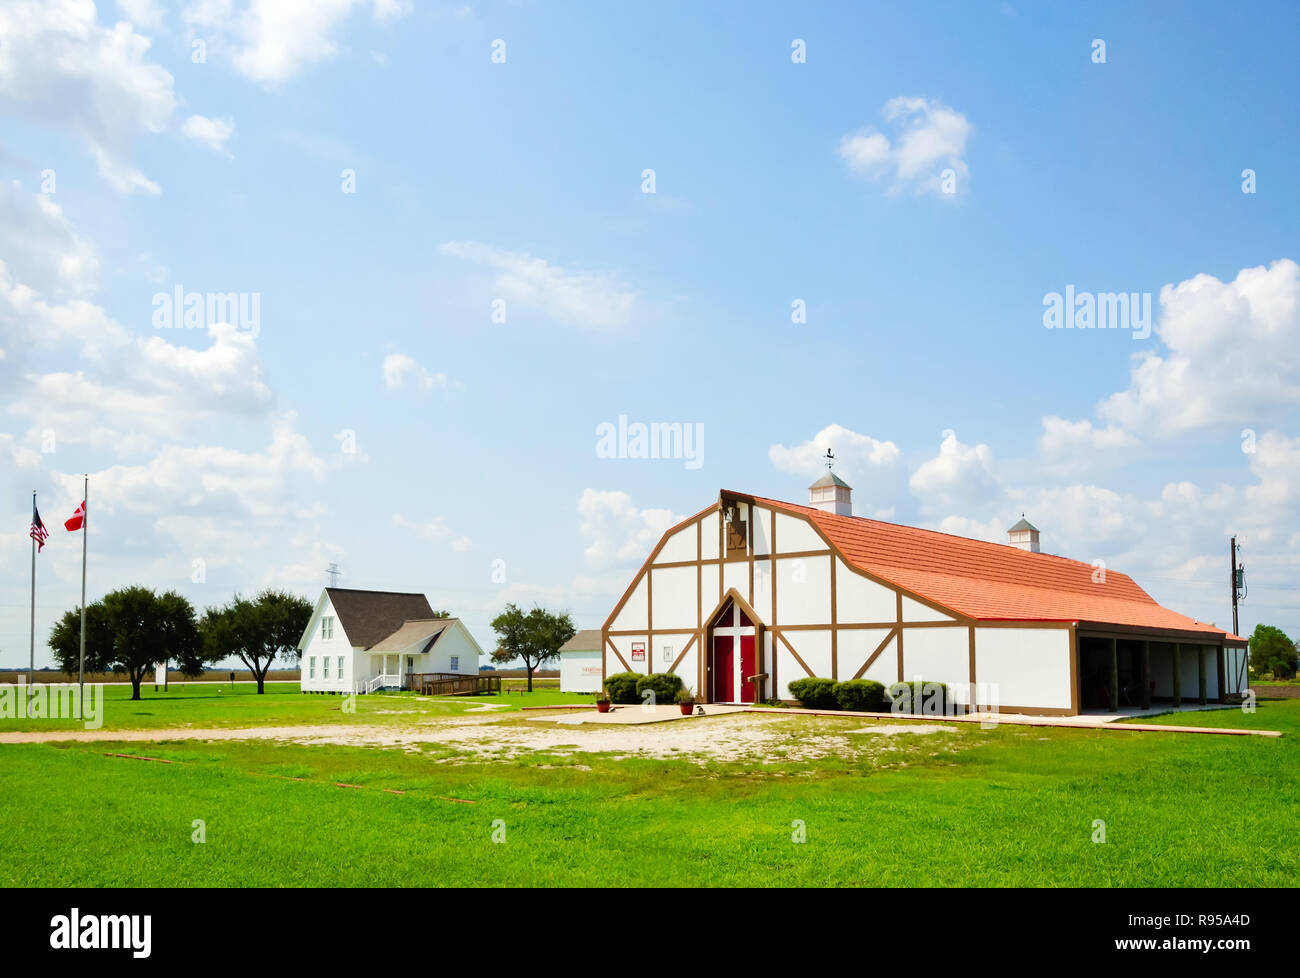 The Danish Heritage Museum and adjacent pioneer house are pictured, Sept. 3, 2017, in Danevang, Texas. Stock Photo